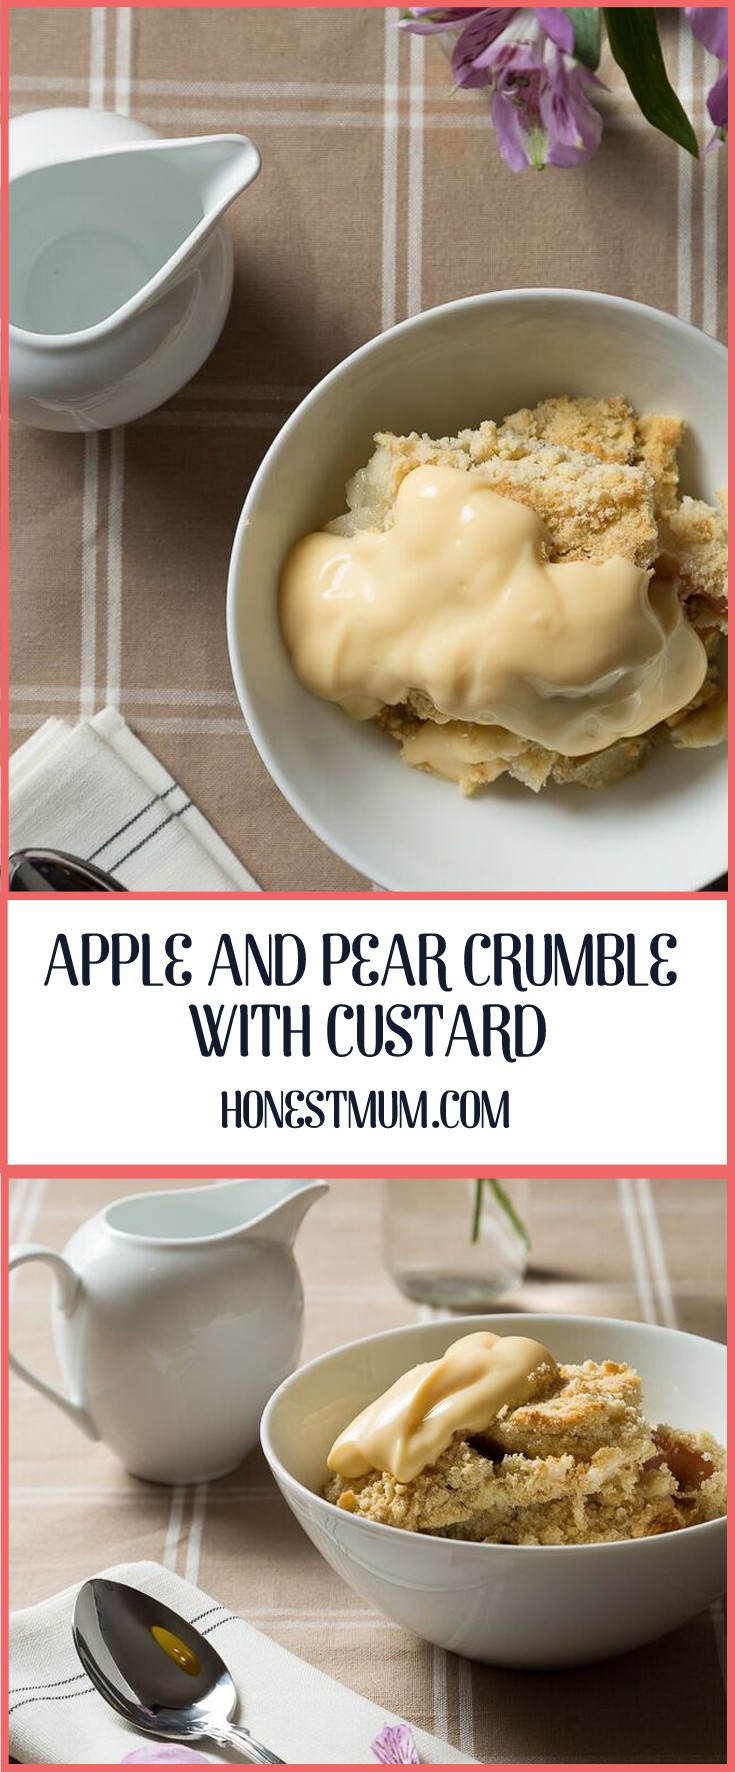 Apple and Pear Crumble with Custard